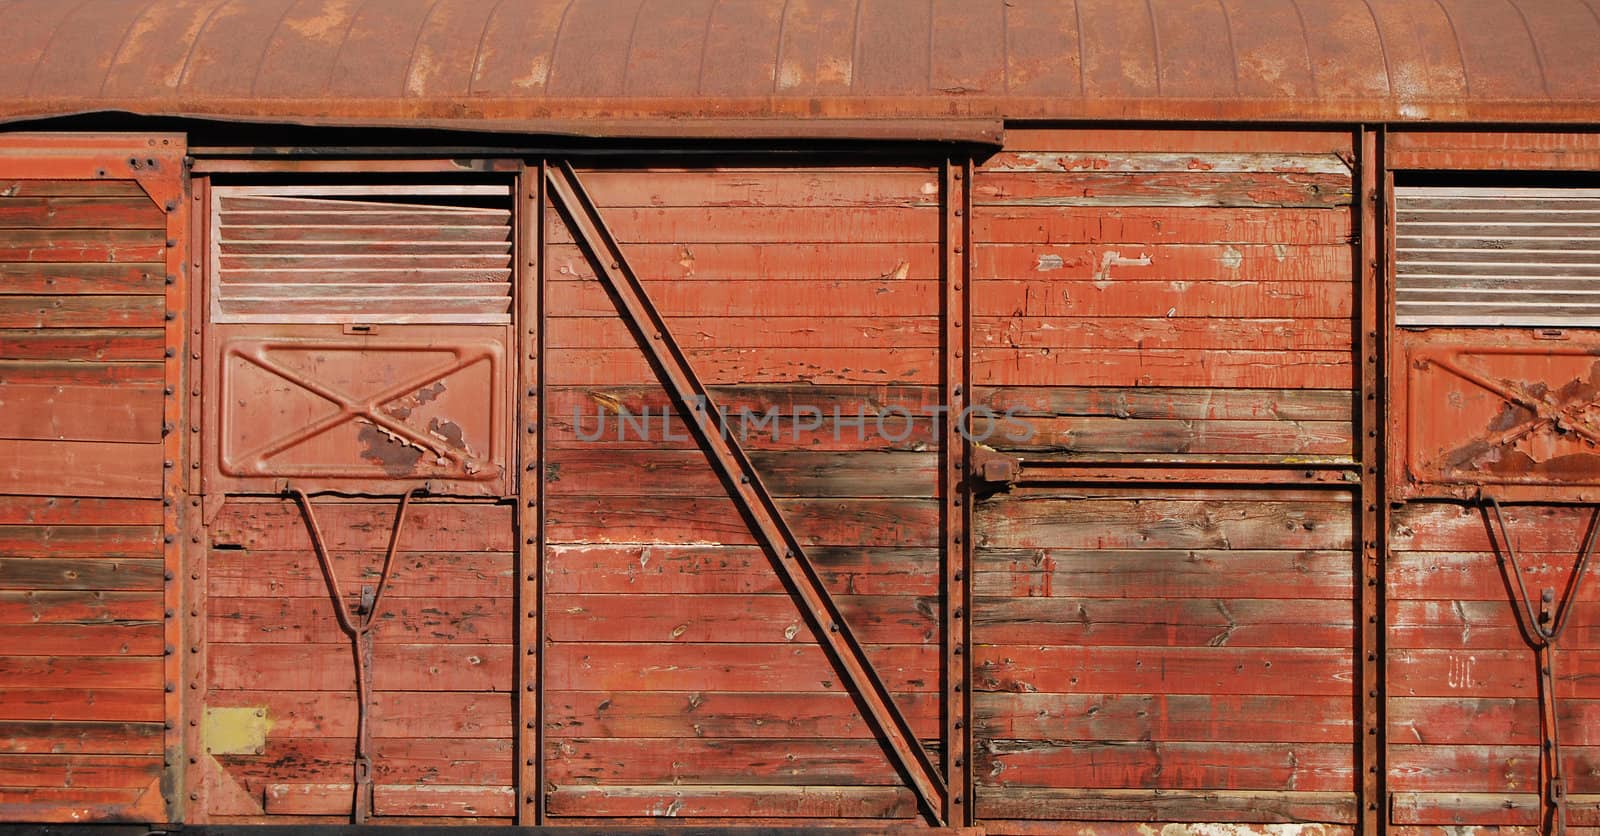 Covered goods wagon side as background by varbenov